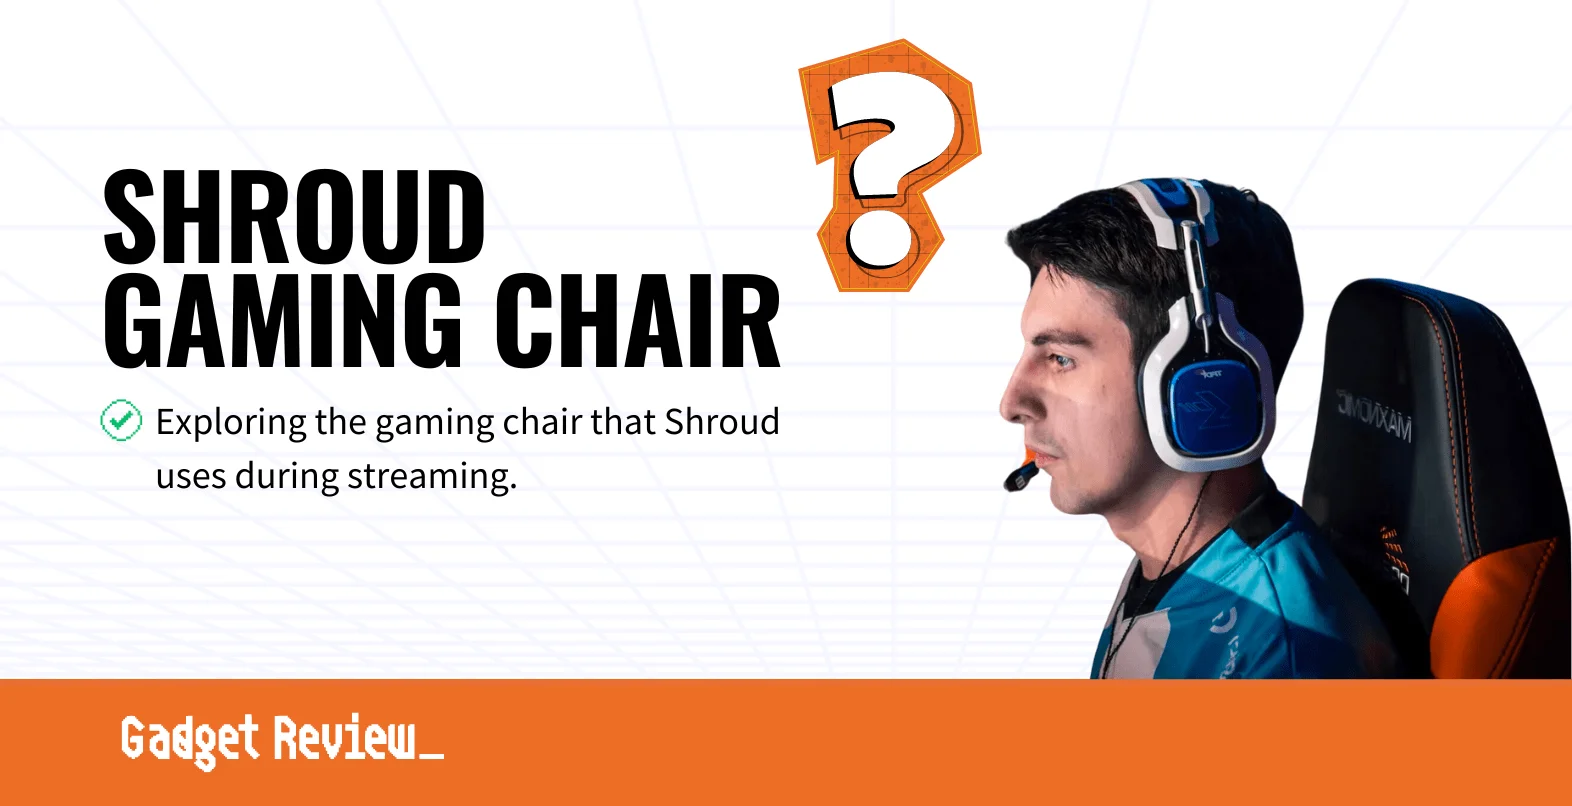 What Gaming Chair Does Shroud Use